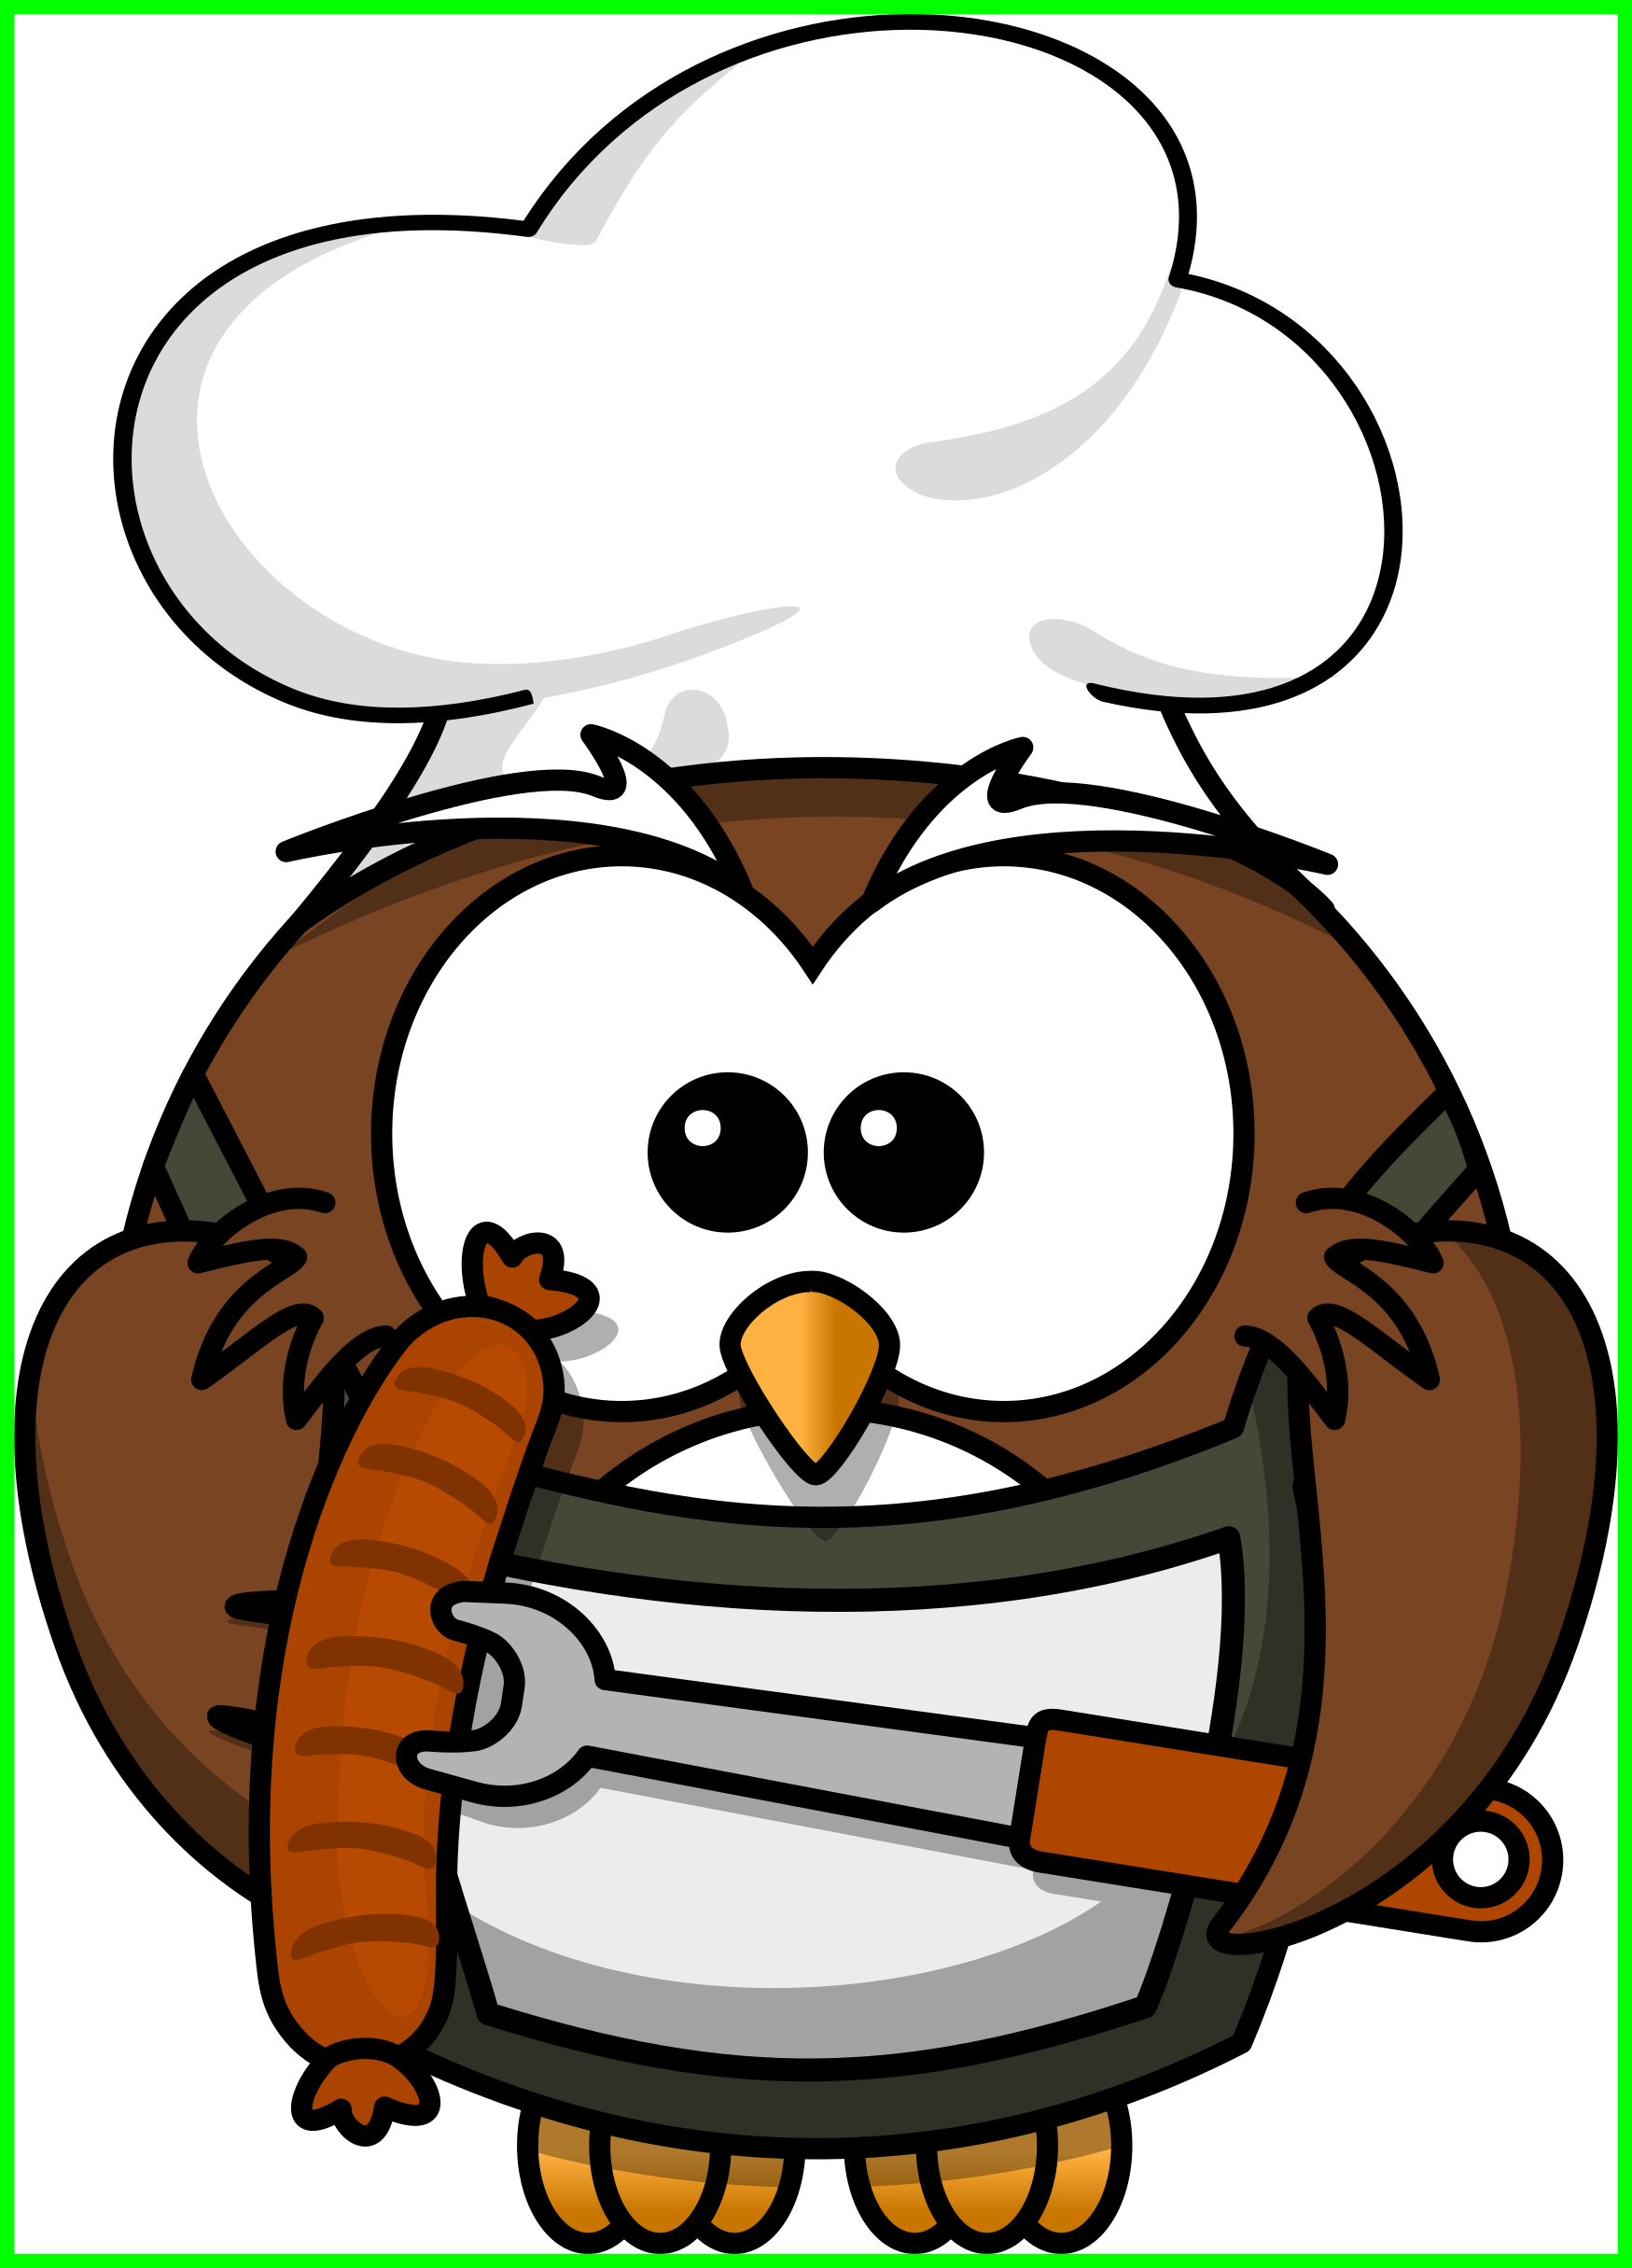 Awesome Owl With Sausage By Bocian On Openclipart Pict - Cartoon Owl (1749x2430)